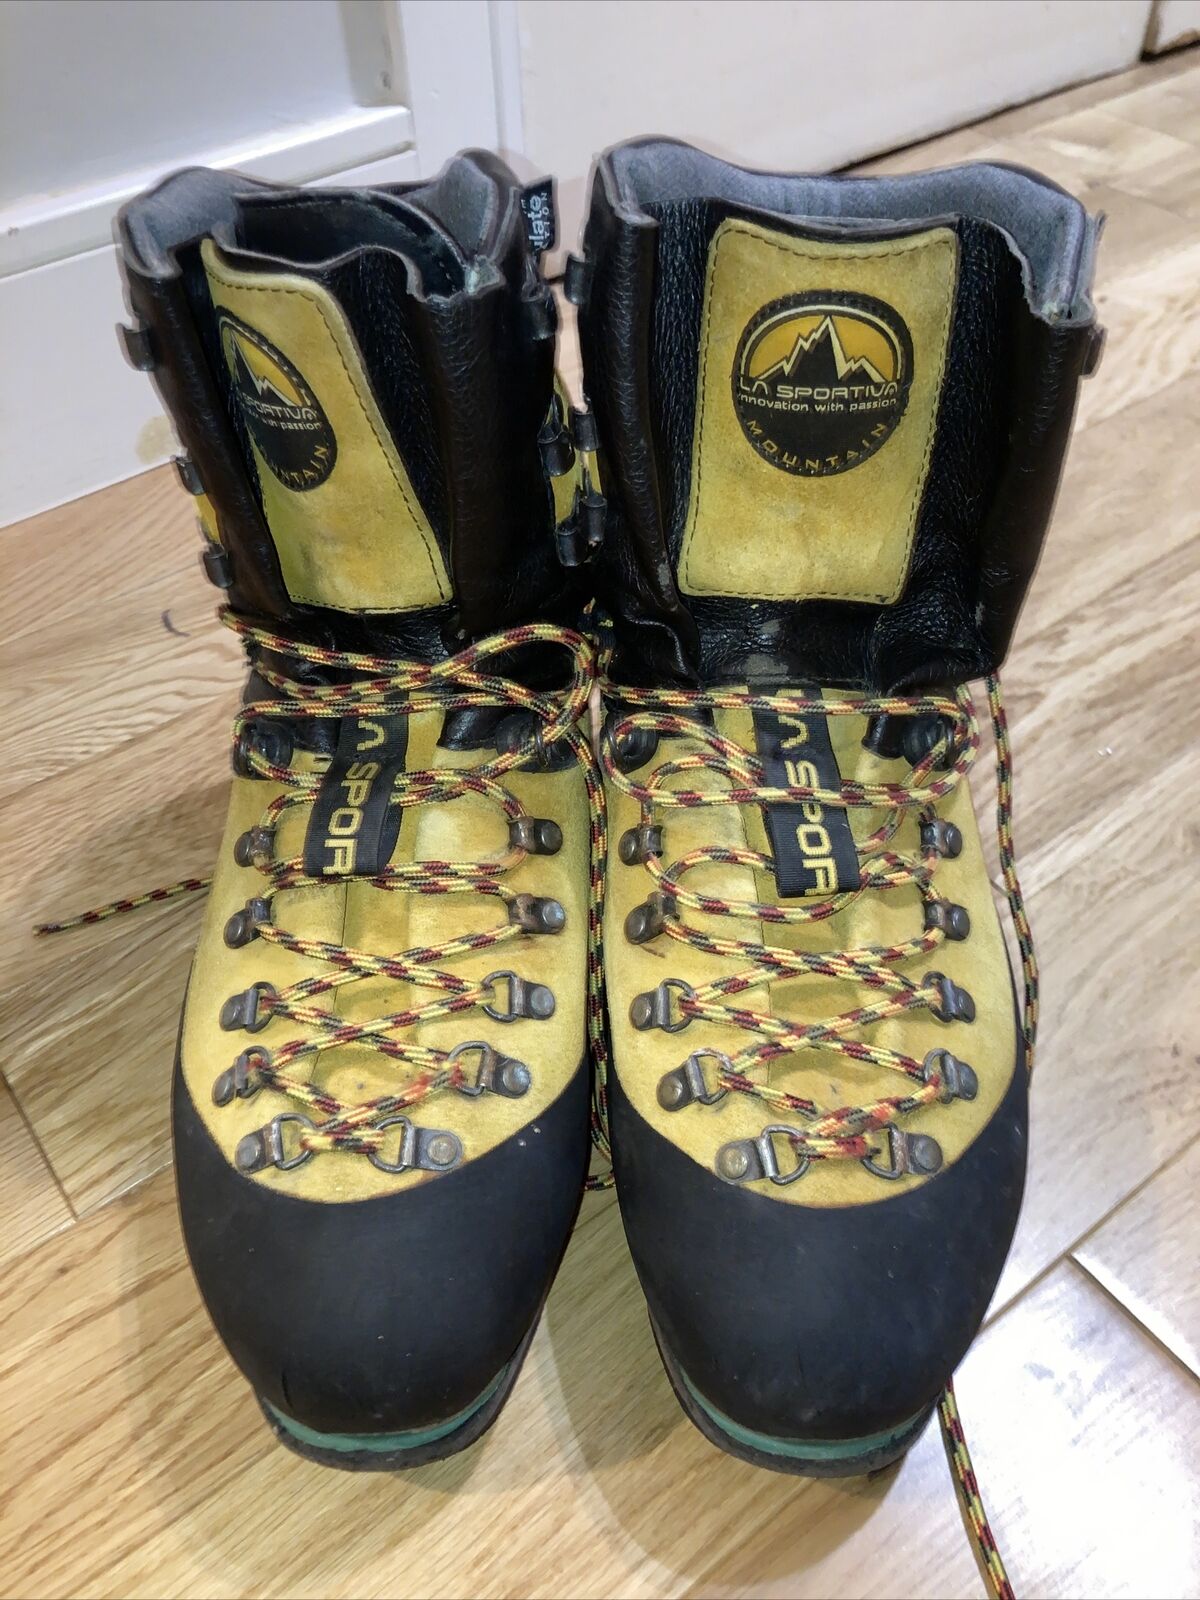 La Sportiva 【半額】 winter mountaineering boots mens 10.5 - 45 used 最大73%OFFクーポン